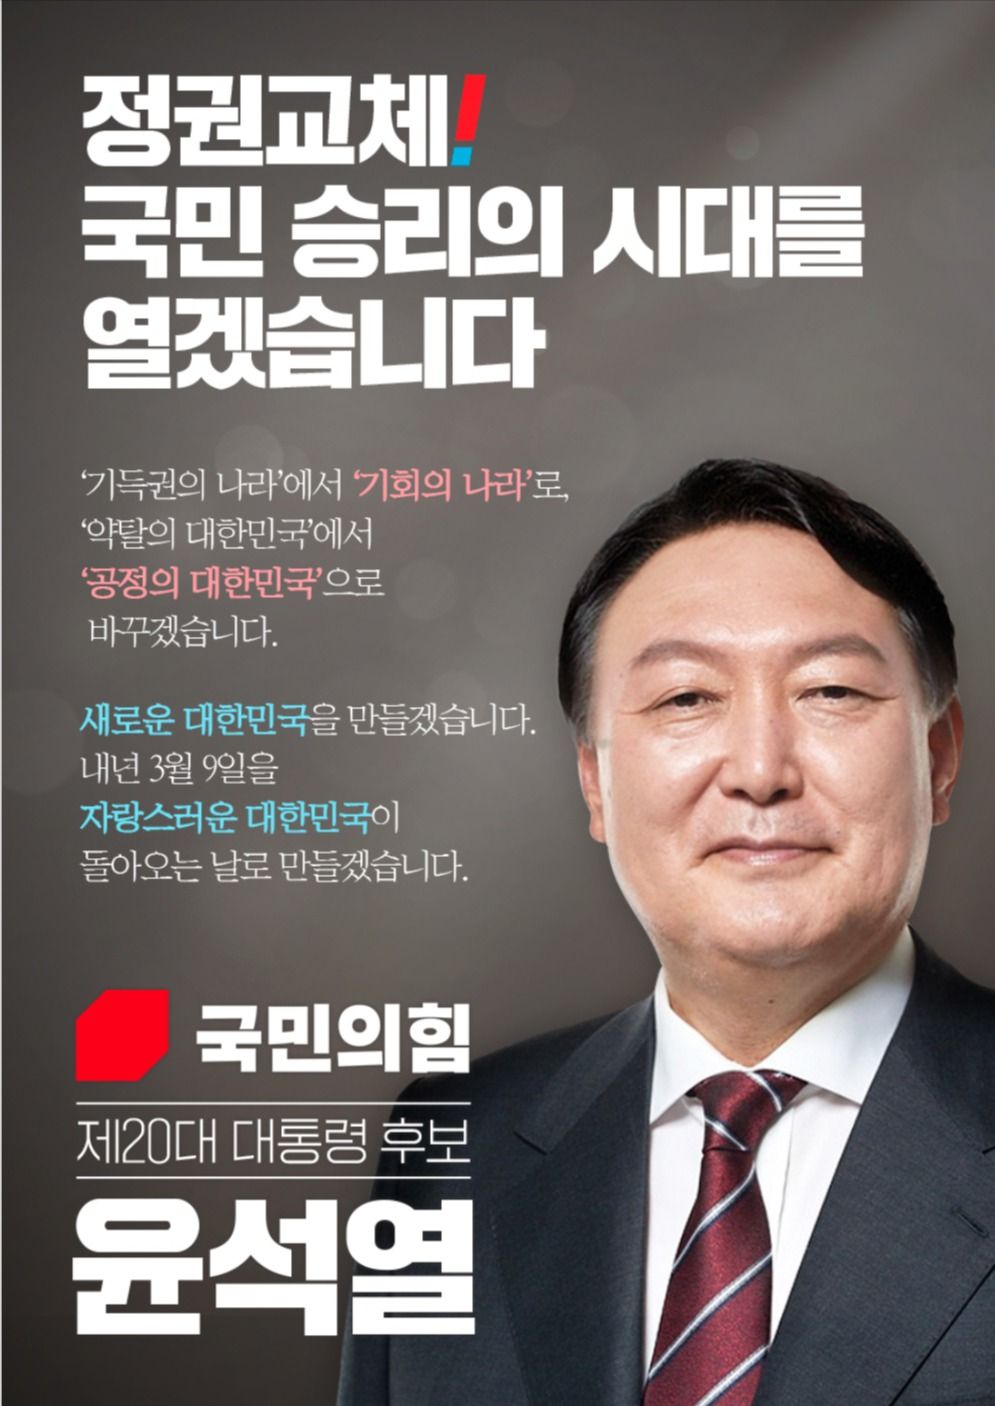 Breaking News Analysis: Yun Seok-yeol Wins the PPP Nomination for 2022 Presidential Election